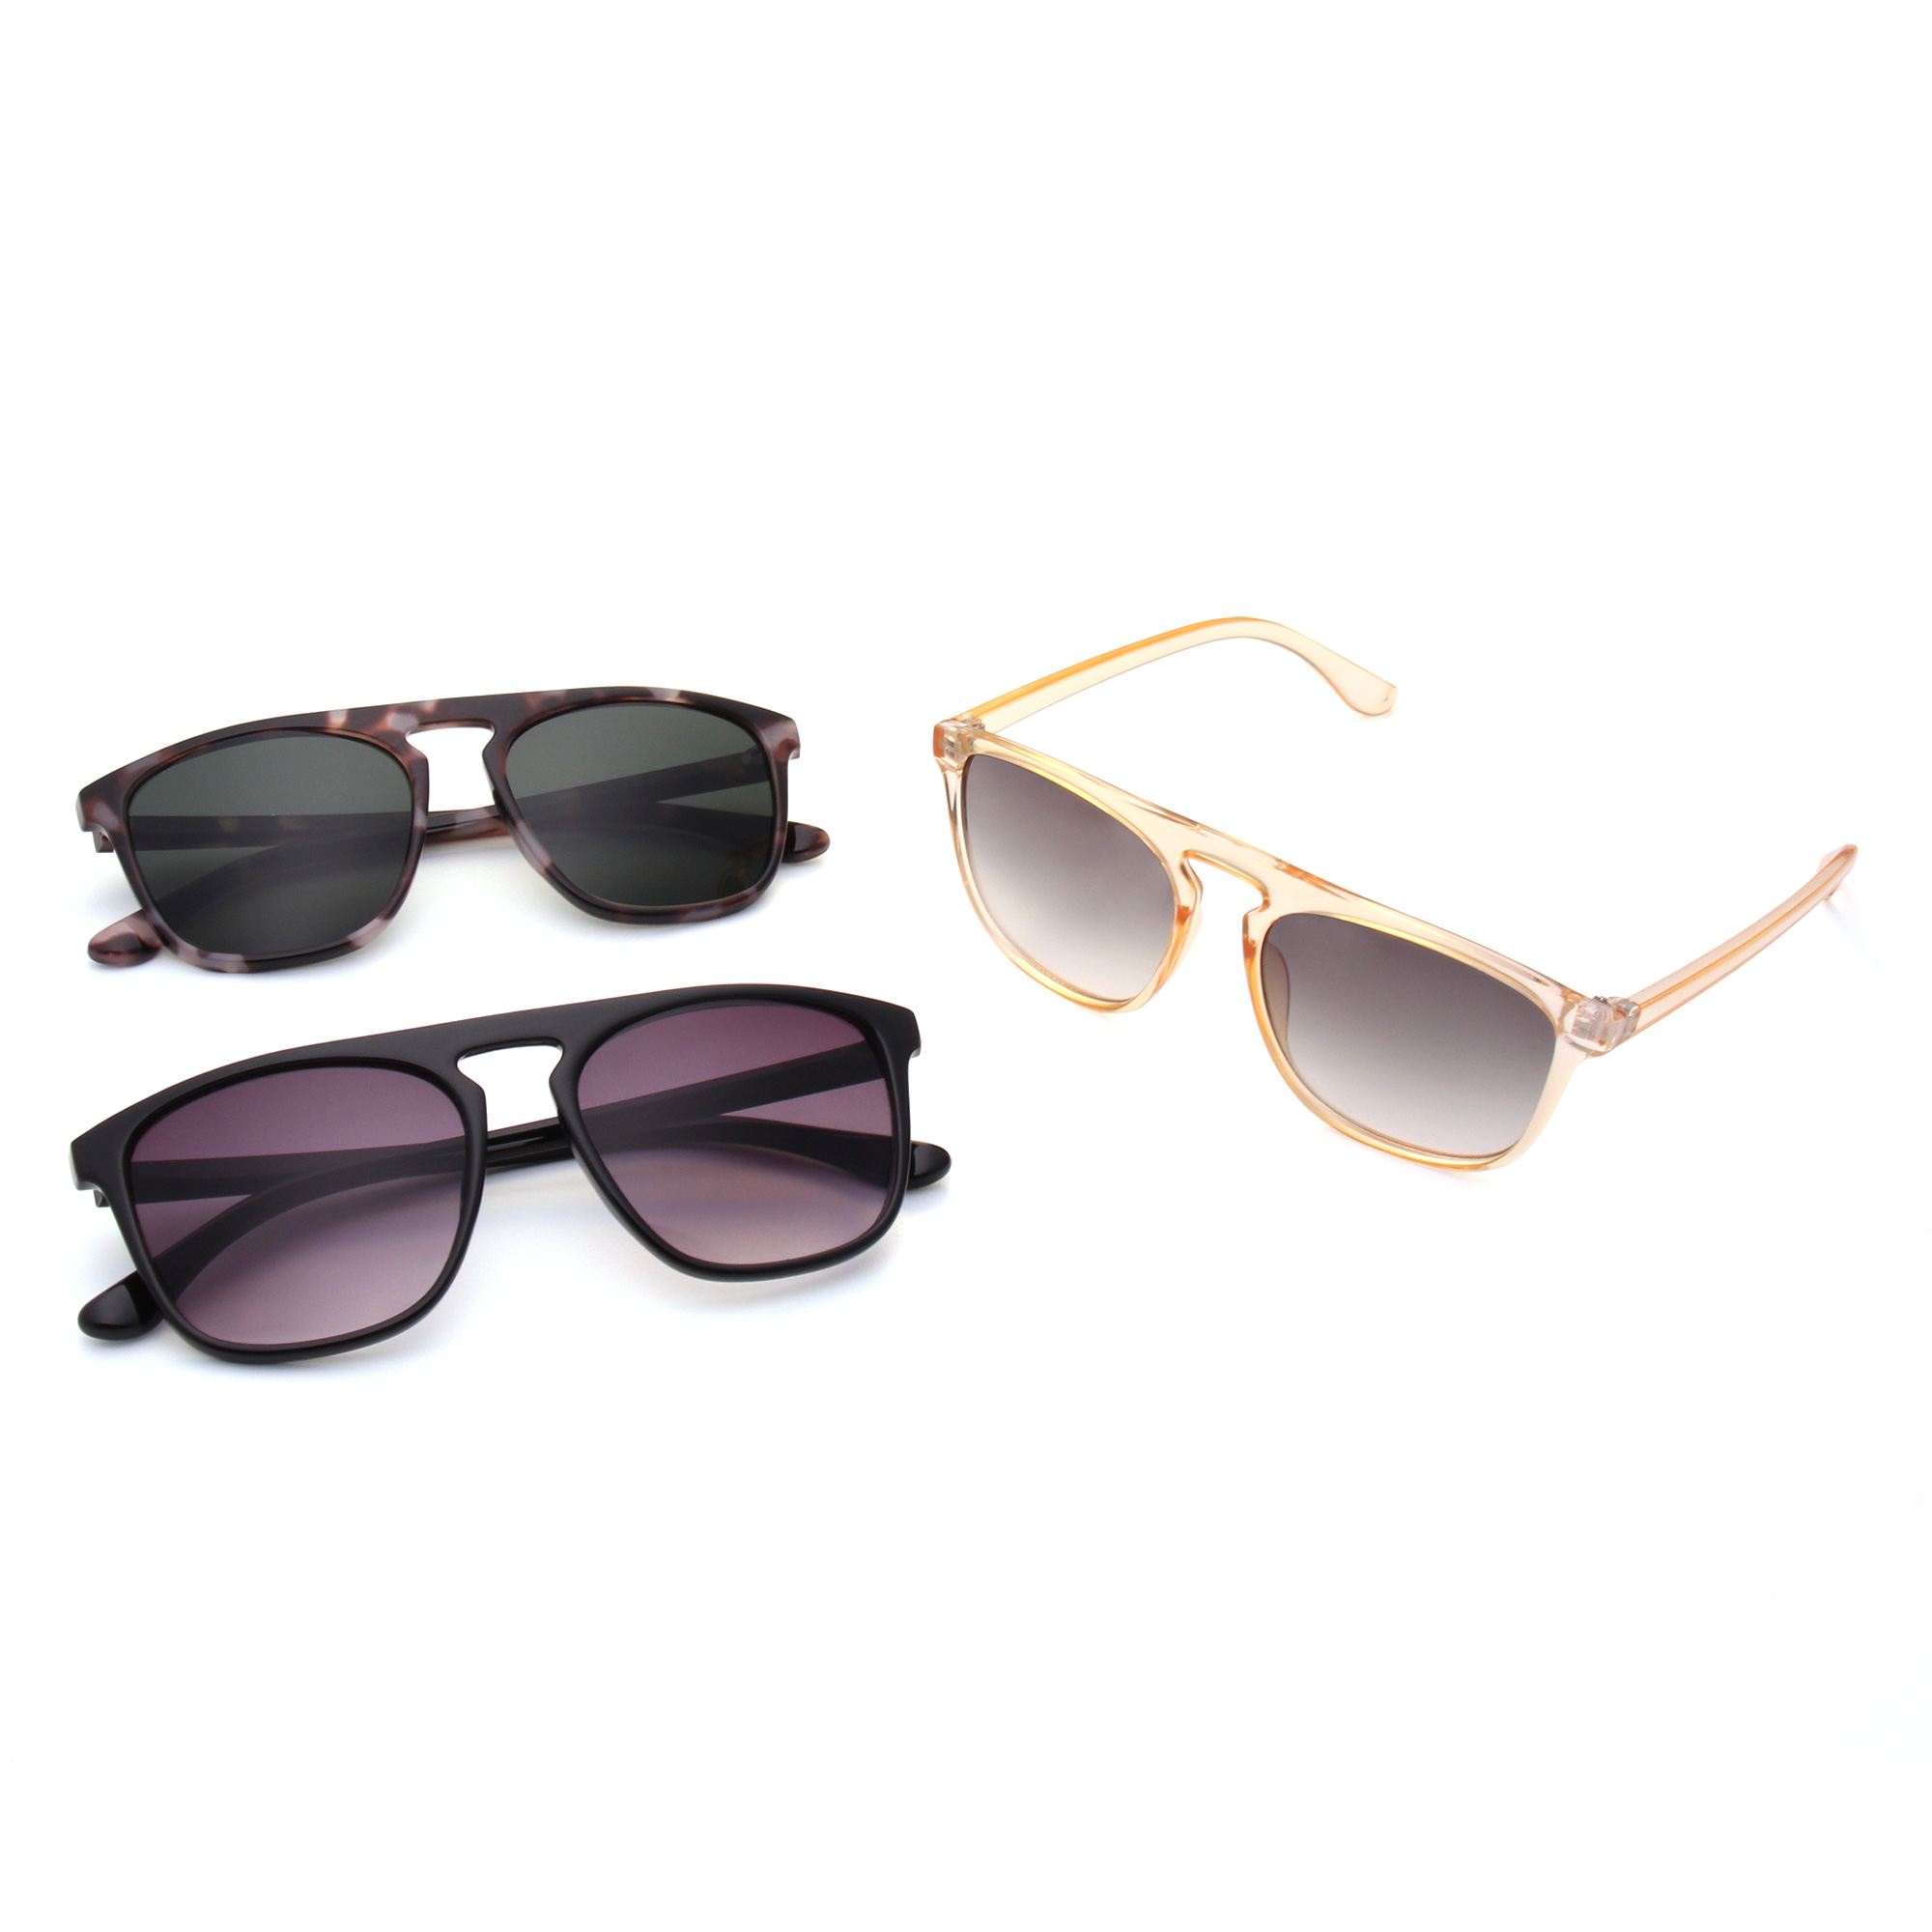 Ins unisex sunglasses made in china for gift-2